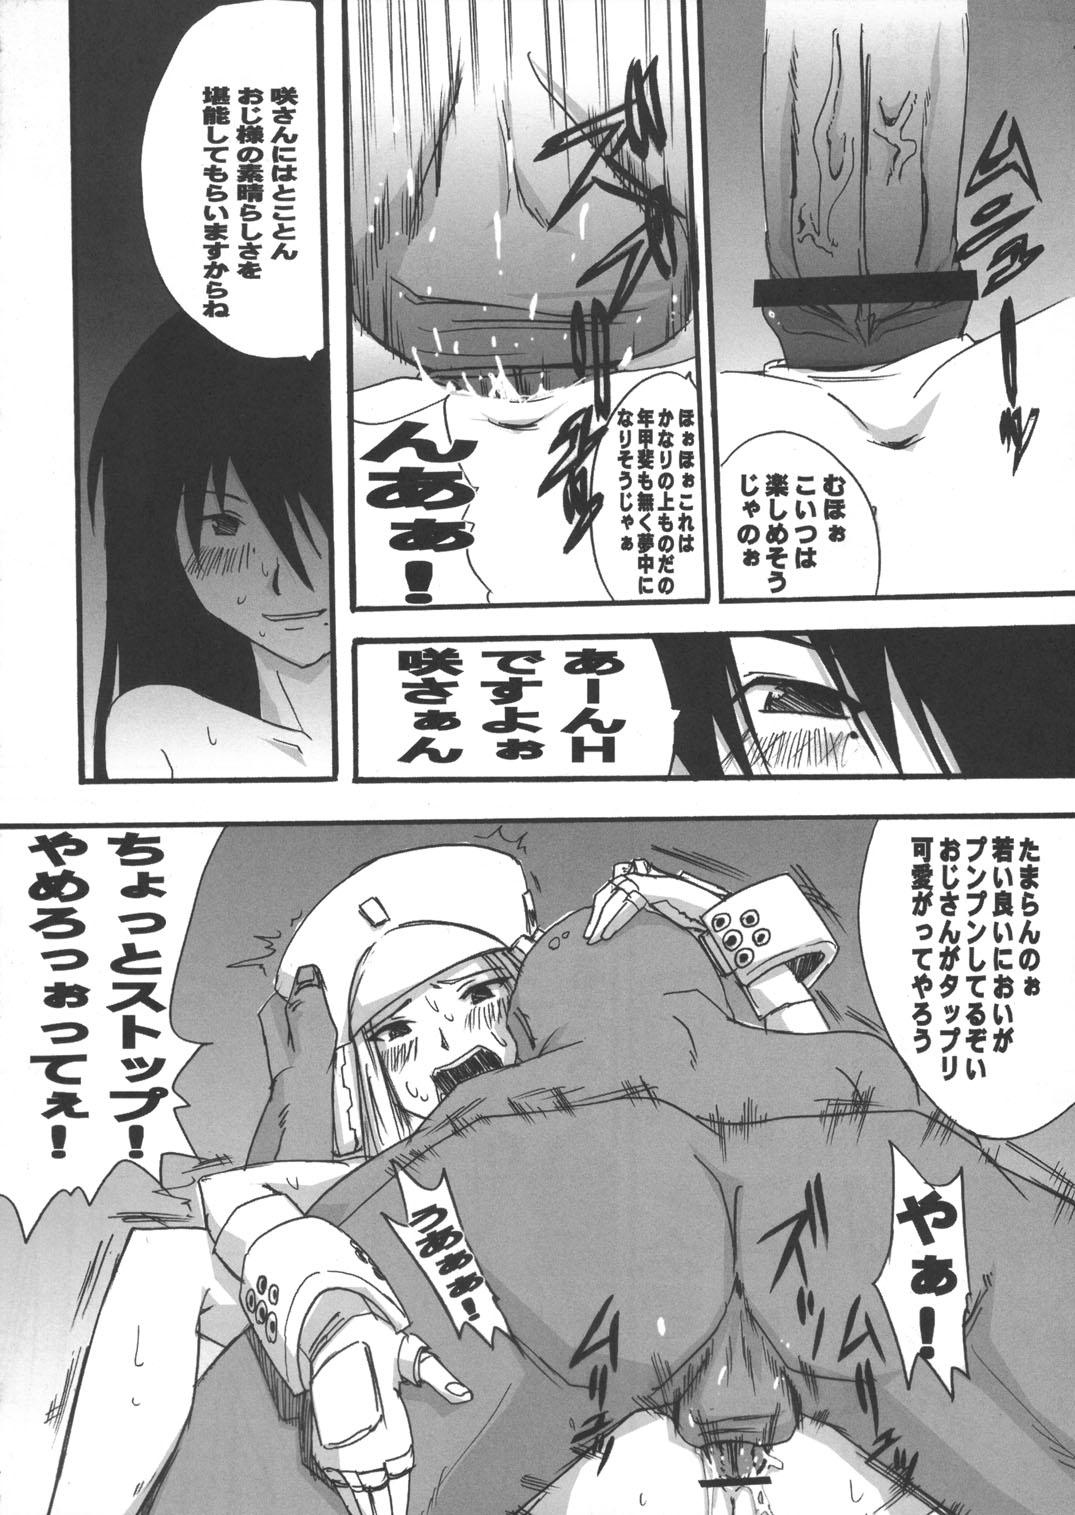 Licking Genshikeso - Genshiken Doggy Style Porn - Page 9